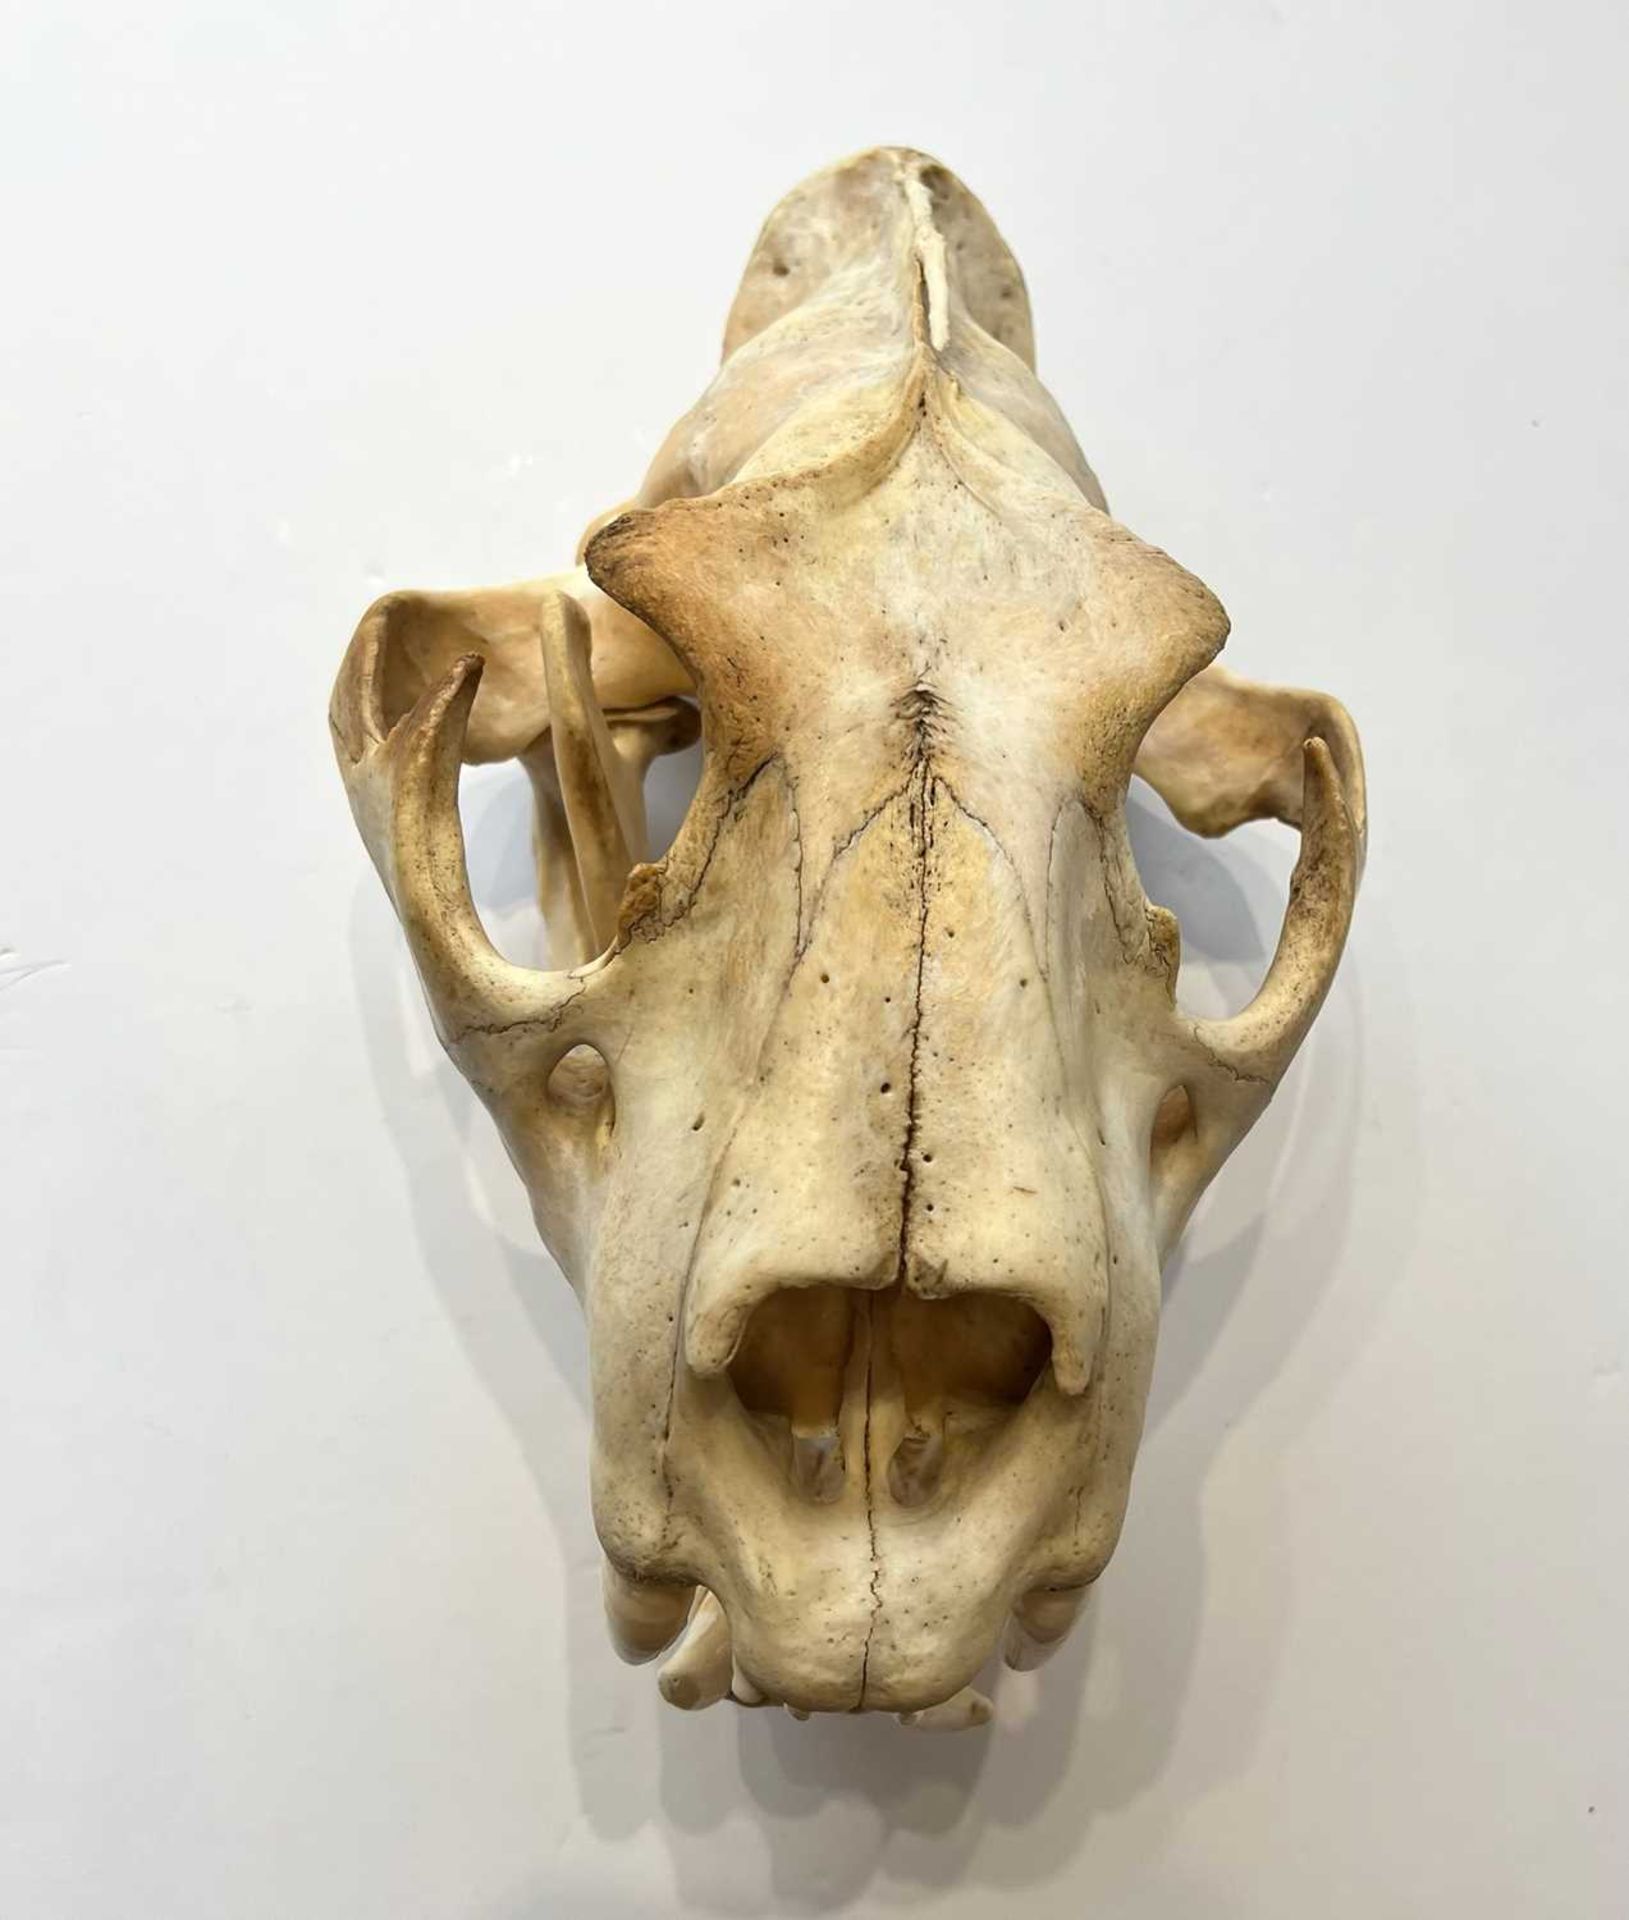 AN AFRICAN LION (PANTHERA LEO) SKULL, LATE 19TH CENTURY - Image 4 of 6